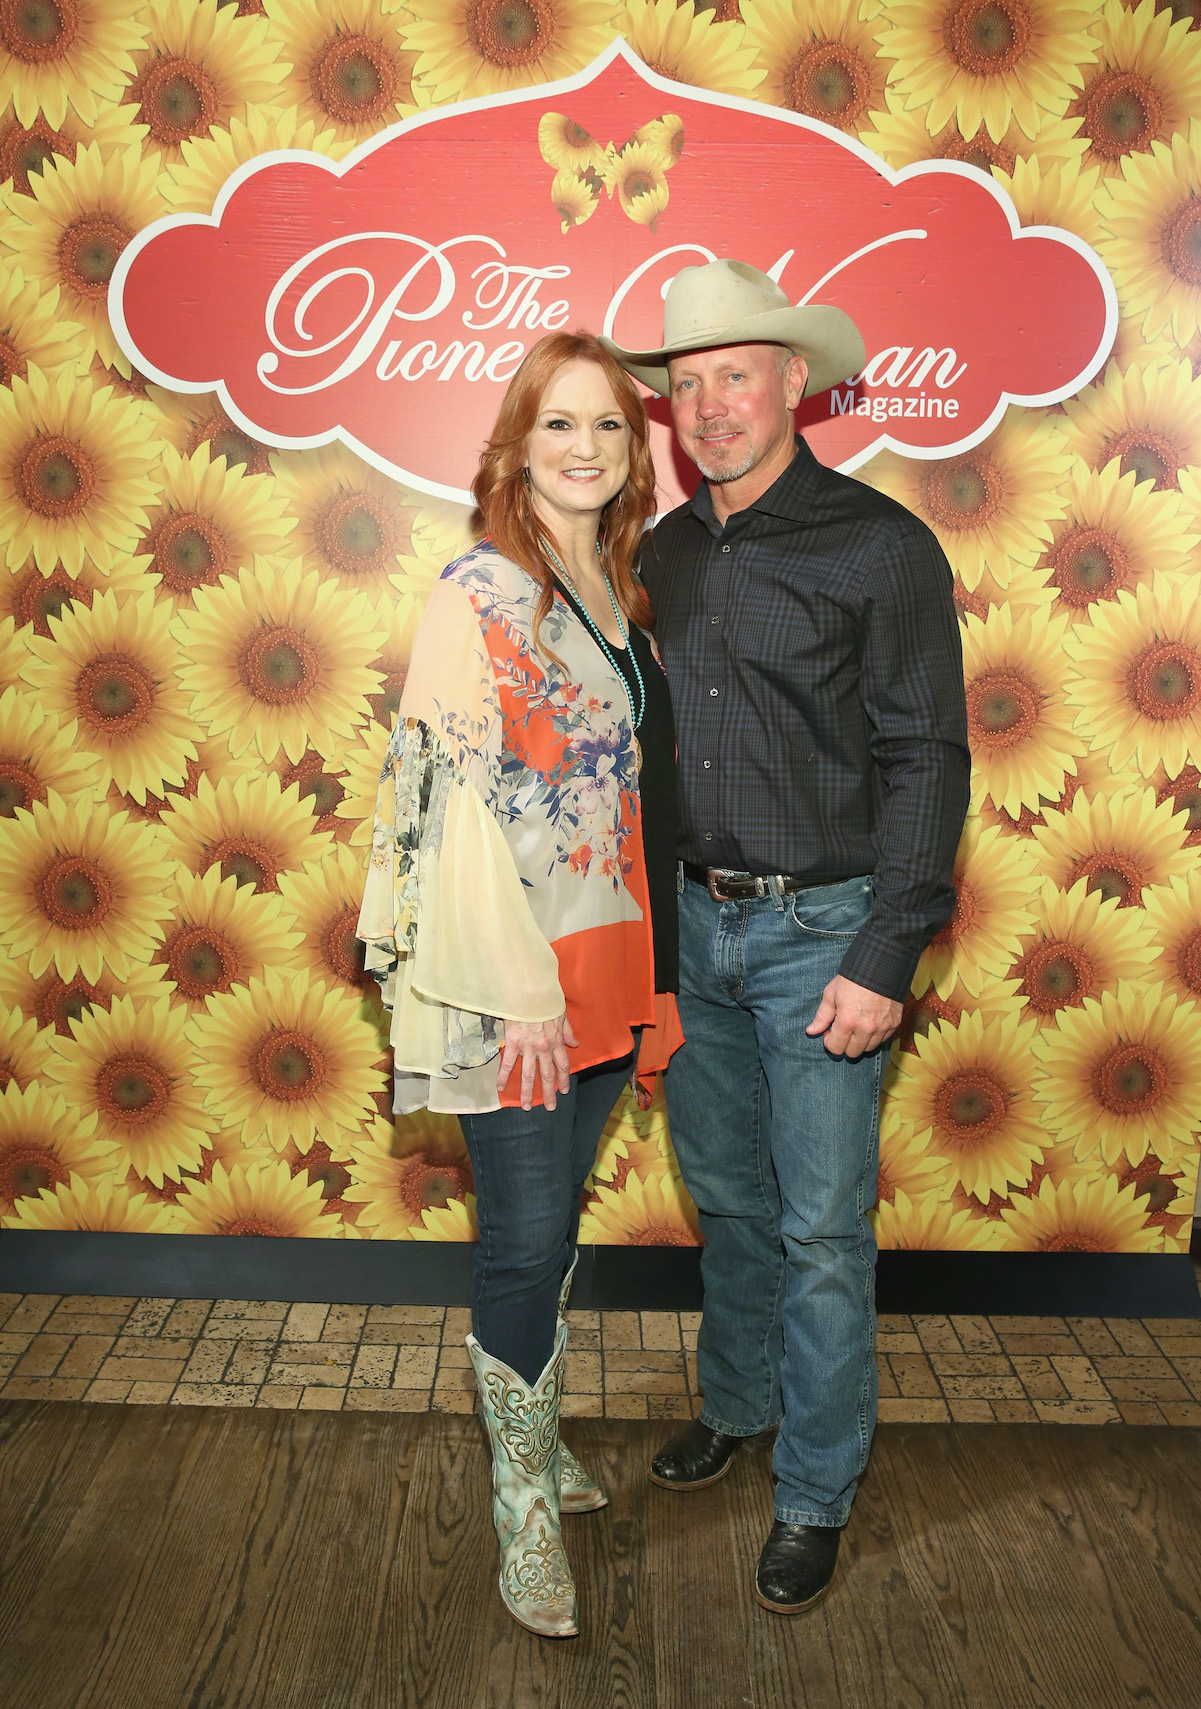 'The Pioneer Woman' star Ree Drummond with her husband, Ladd Drummond pose at an event for 'Pioneer Woman Magazine.'